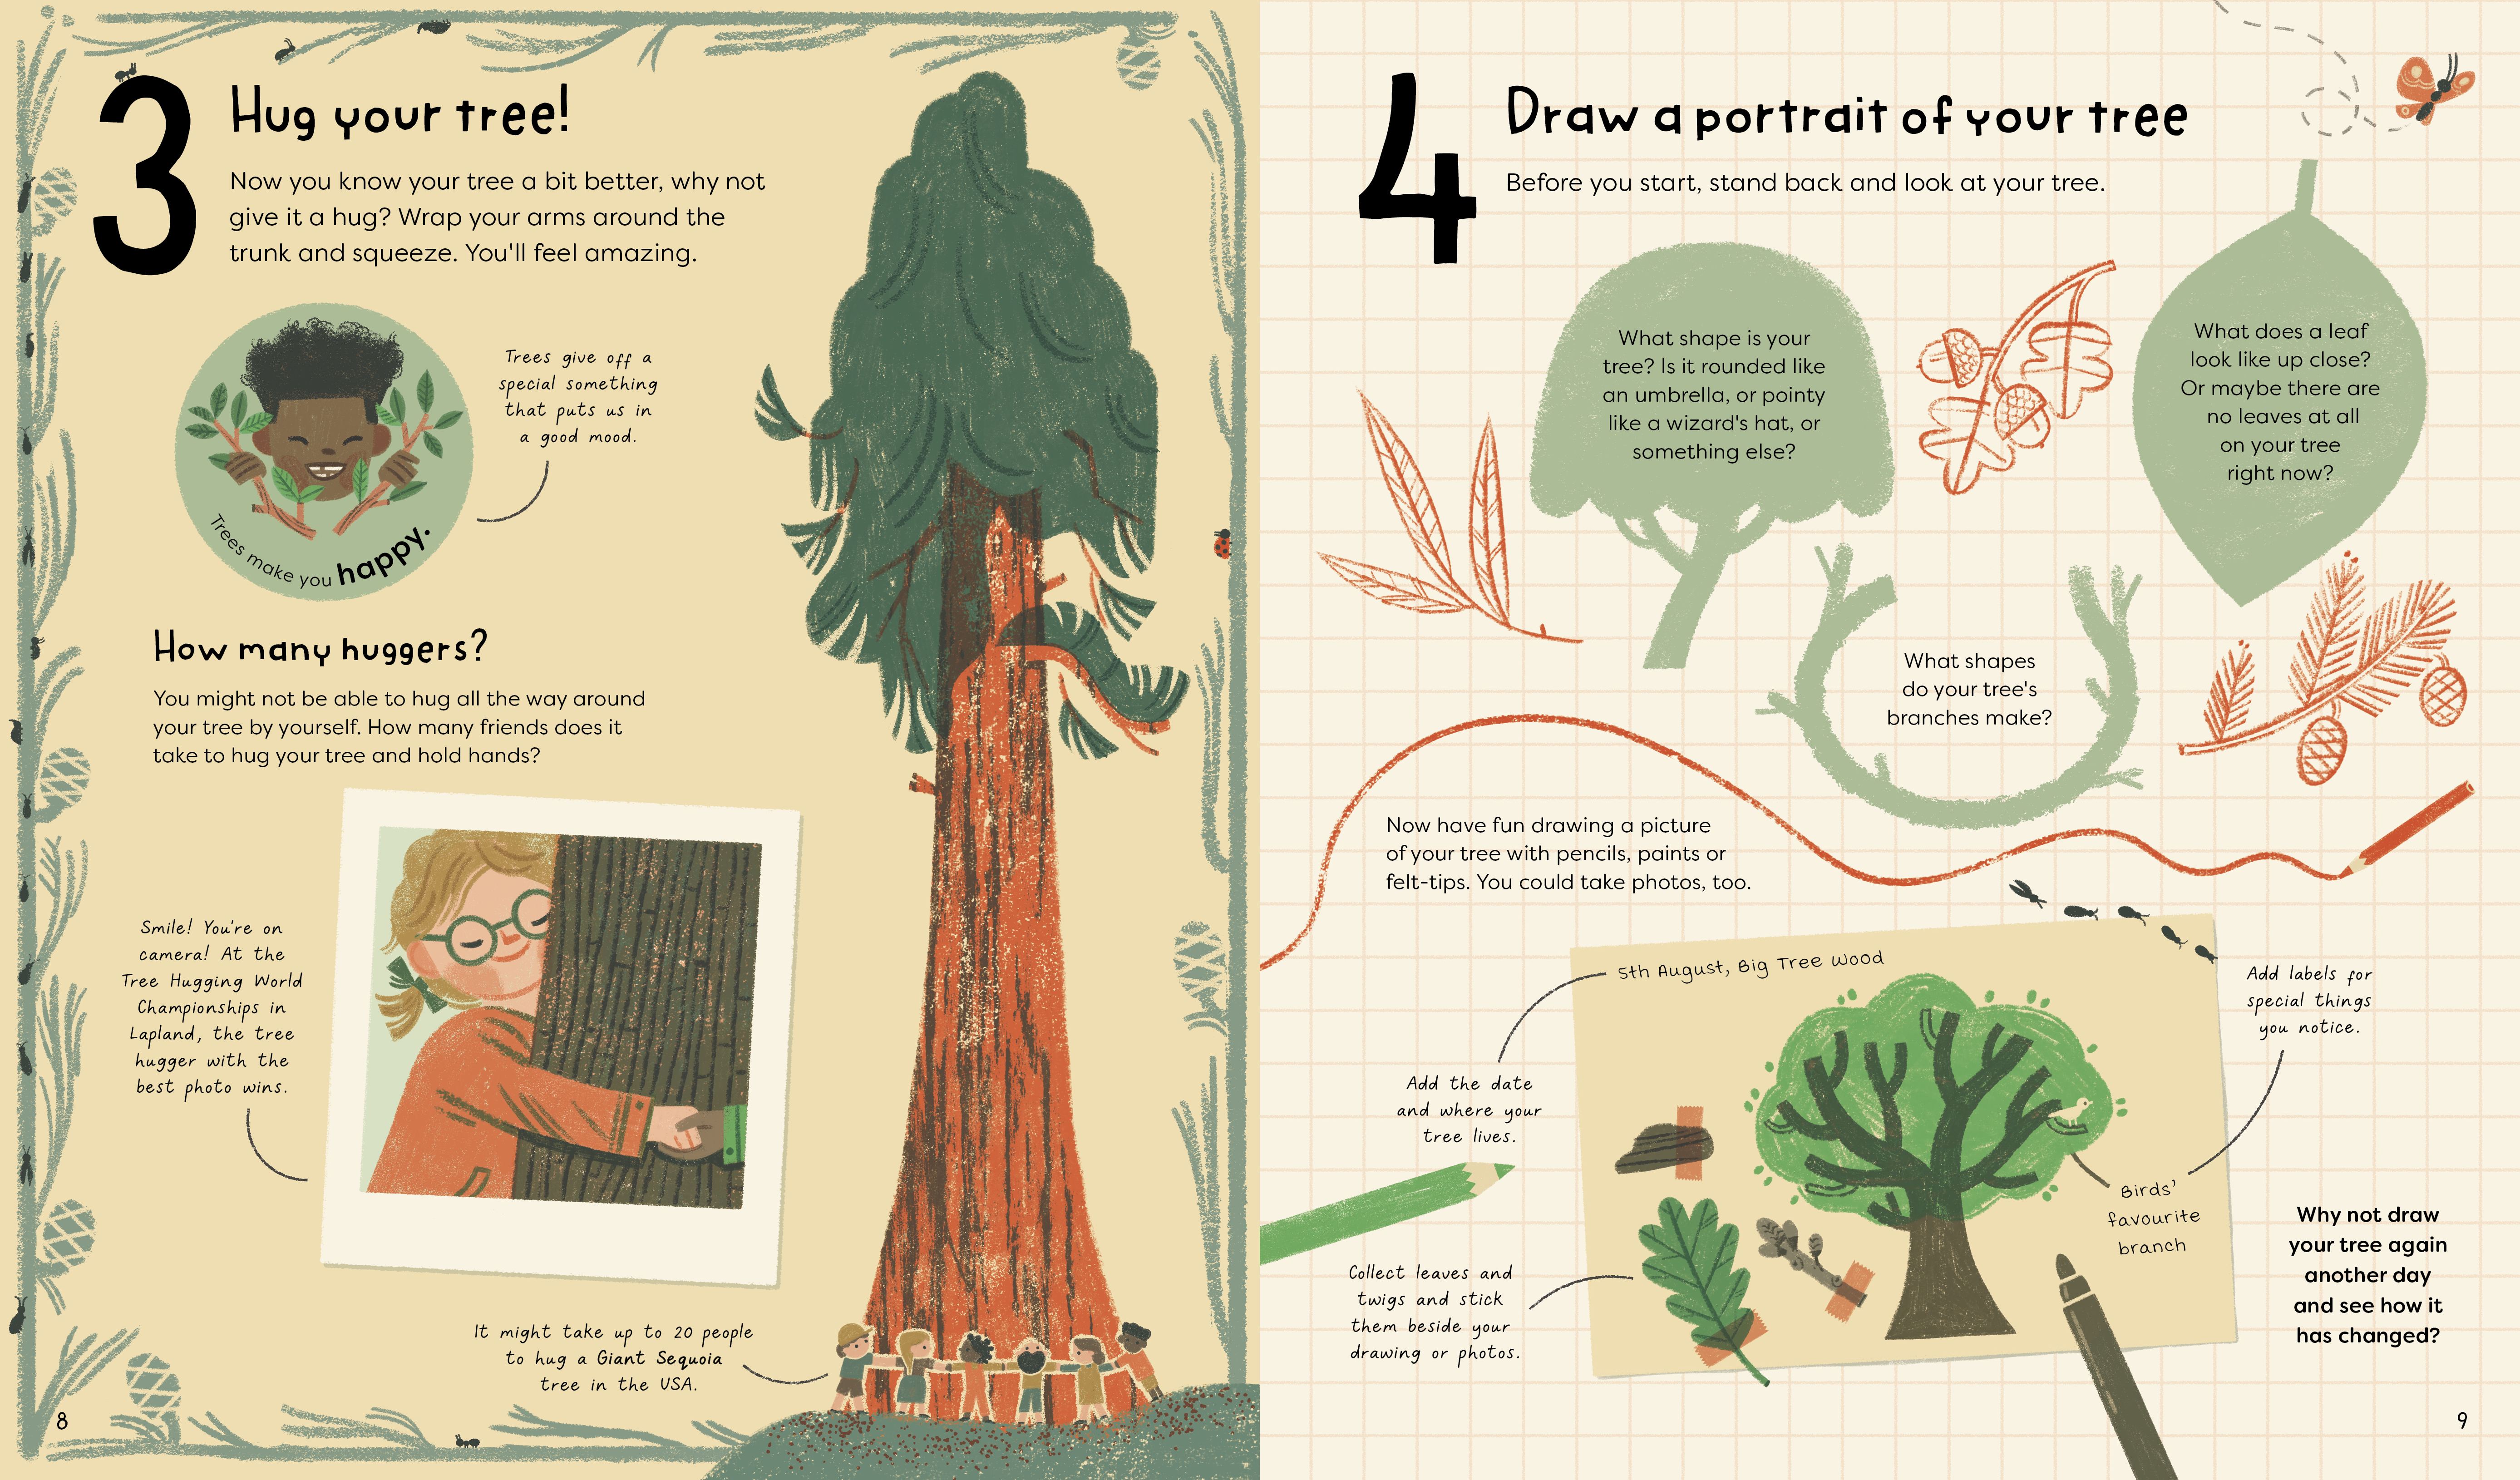 21 Things to Do With a Tree